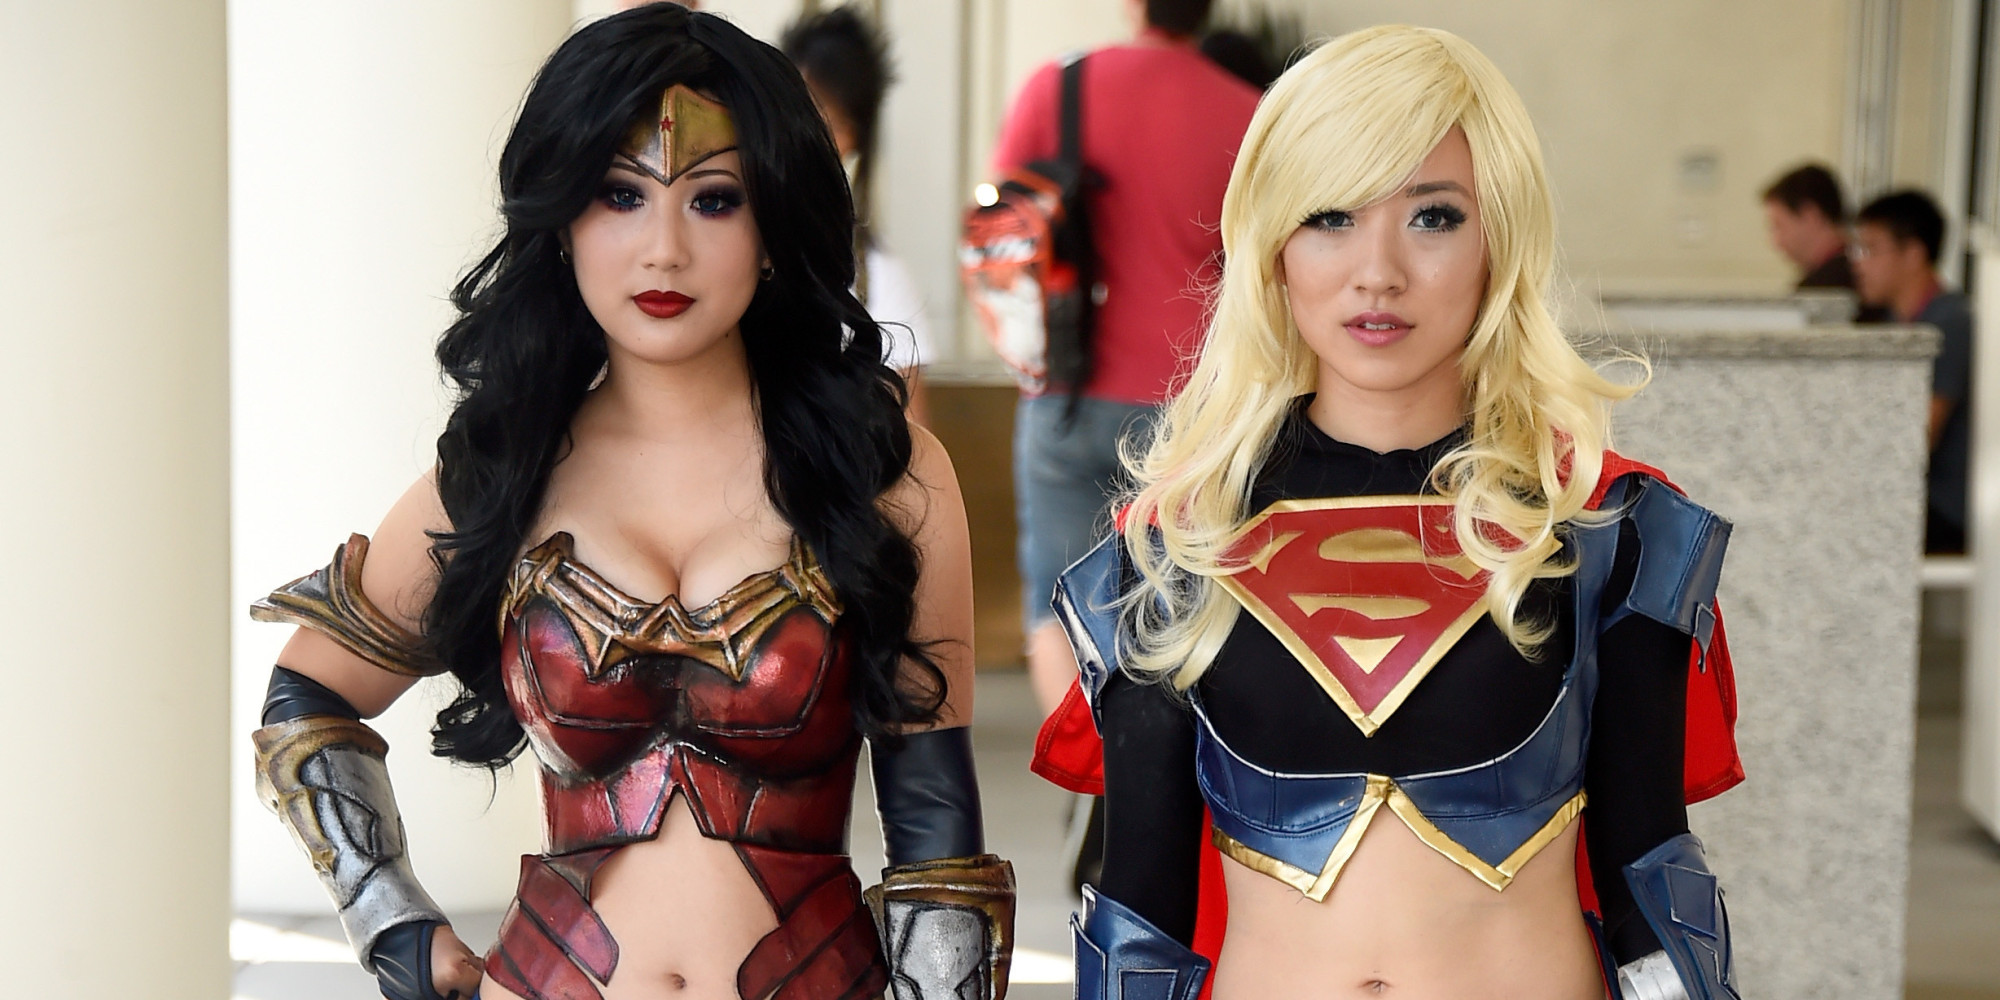 Sexual Harassment At Comic Con Leads To Call For New Convention Policy 